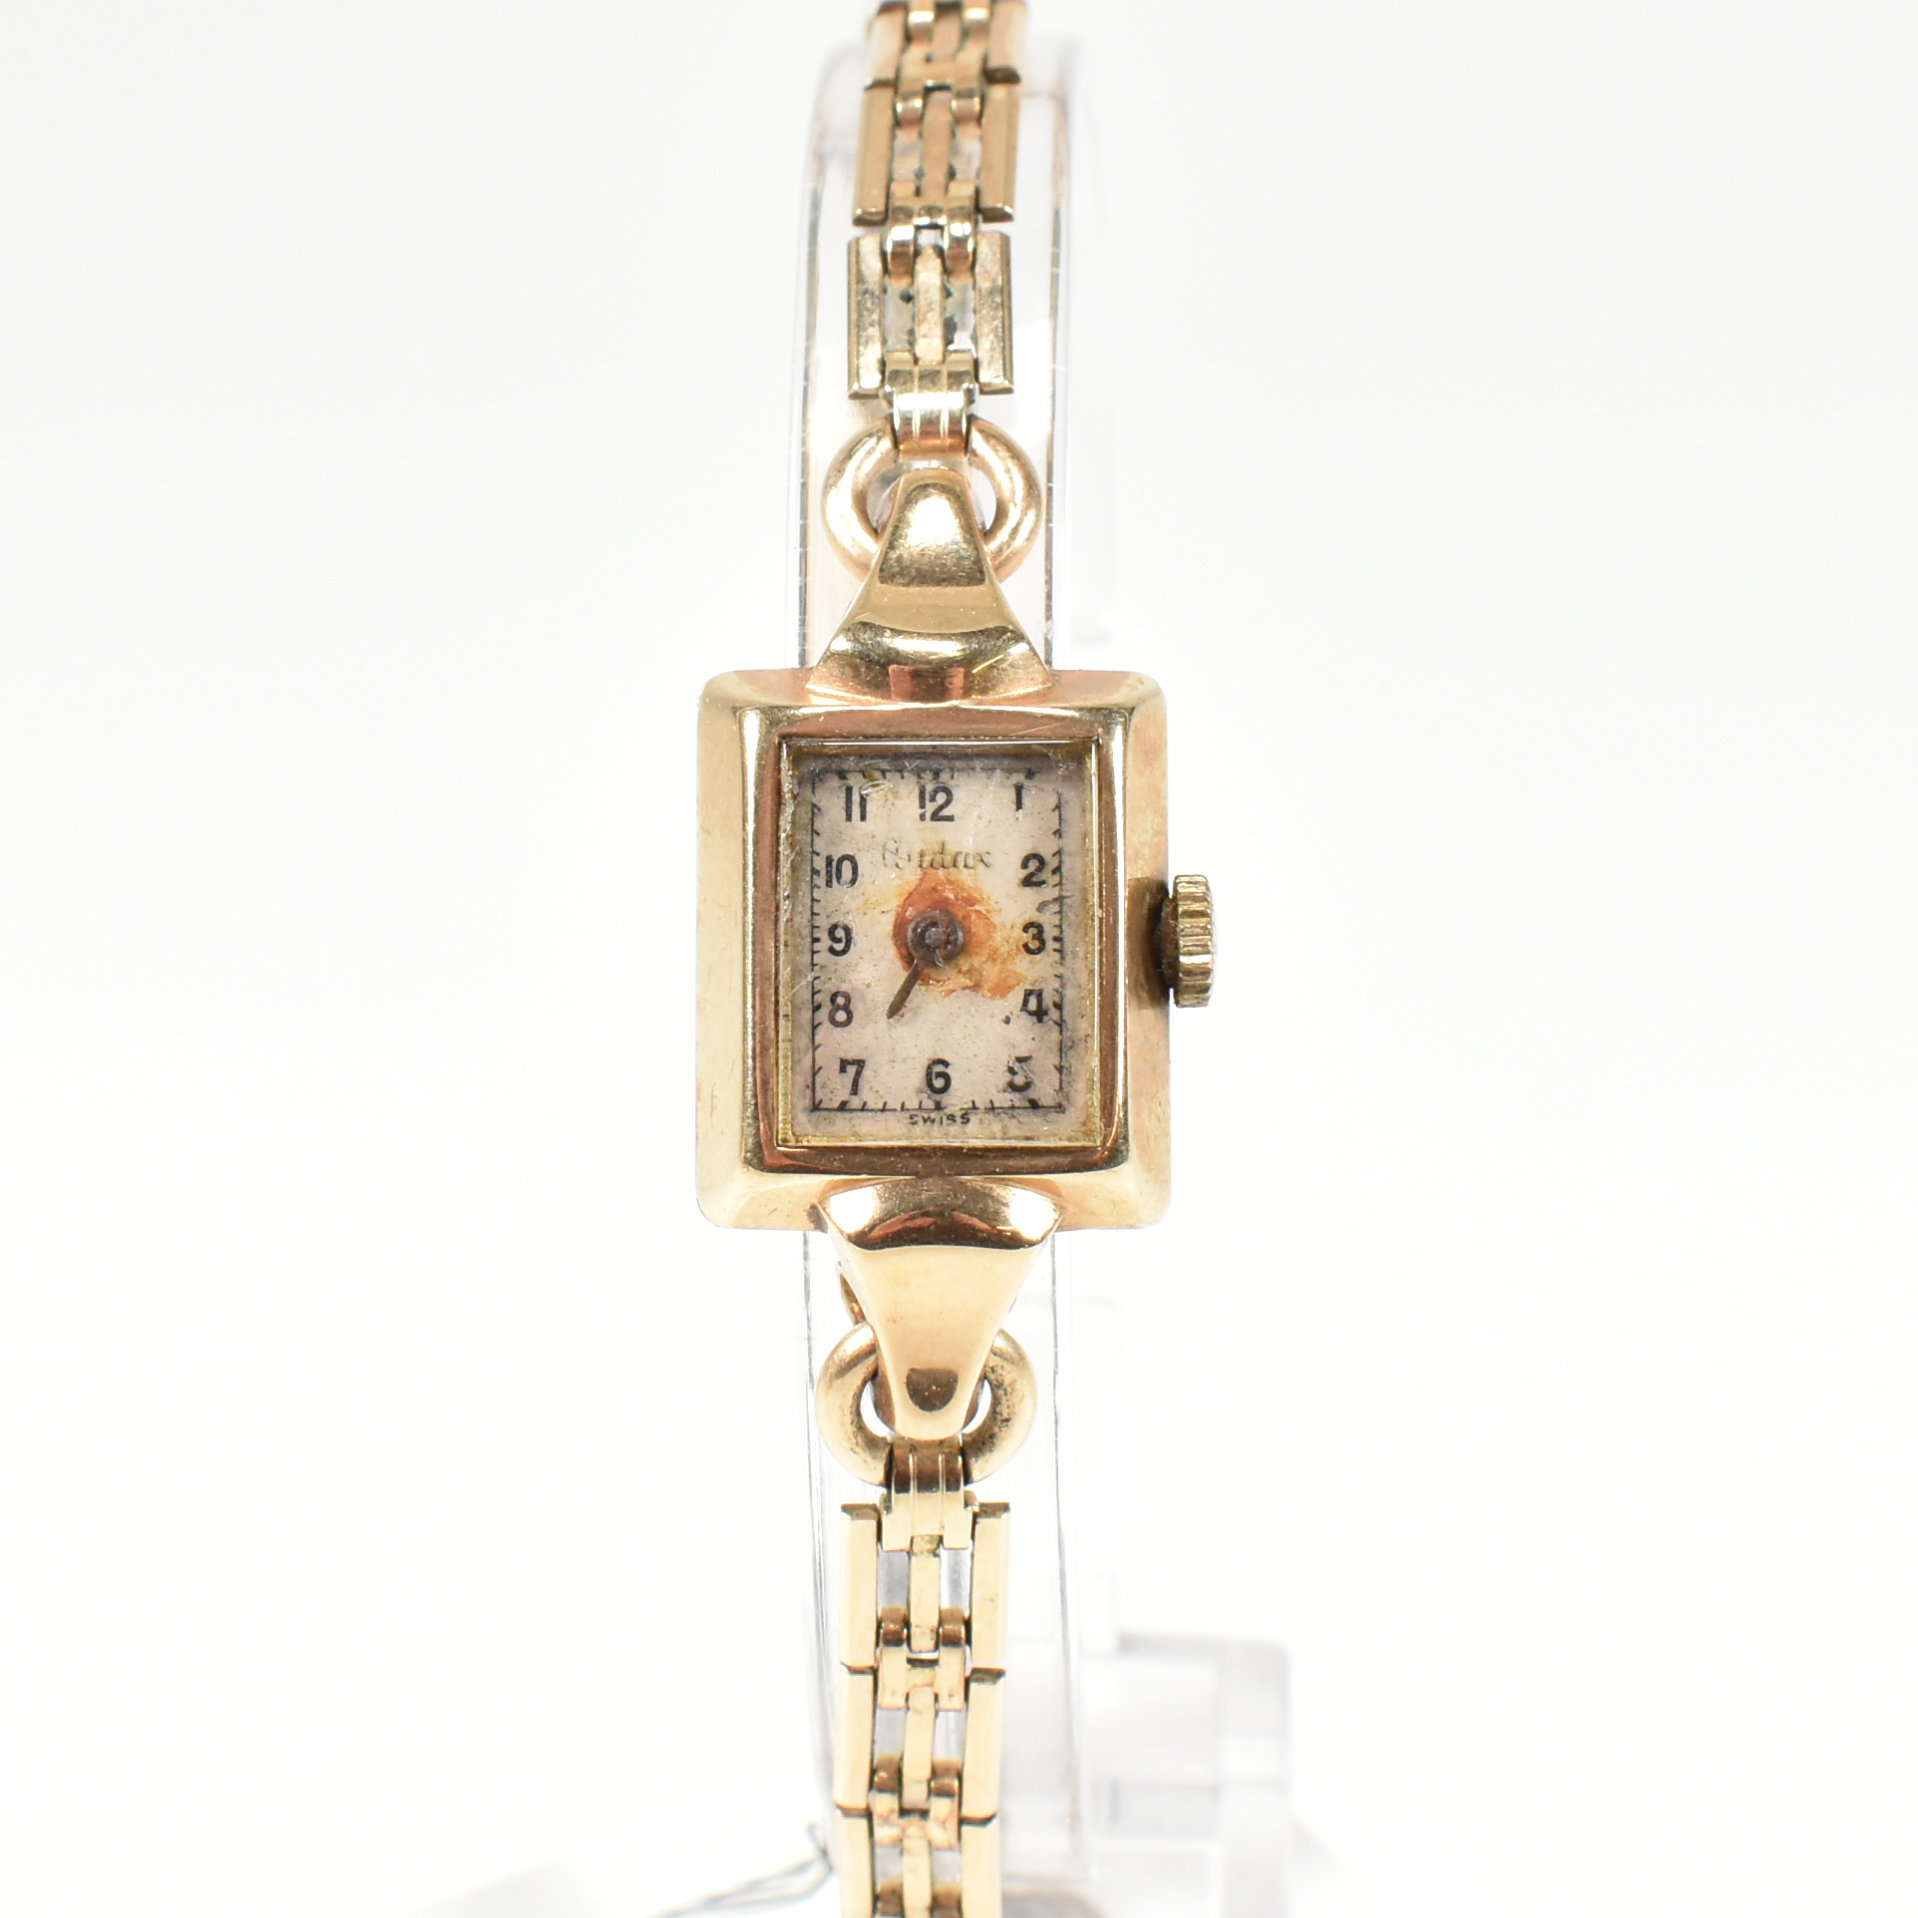 HALLMARKED 9CT GOLD AUDAX LADIES DRESS WATCH WITH ROLLED GOLD BRACELET - Image 7 of 7